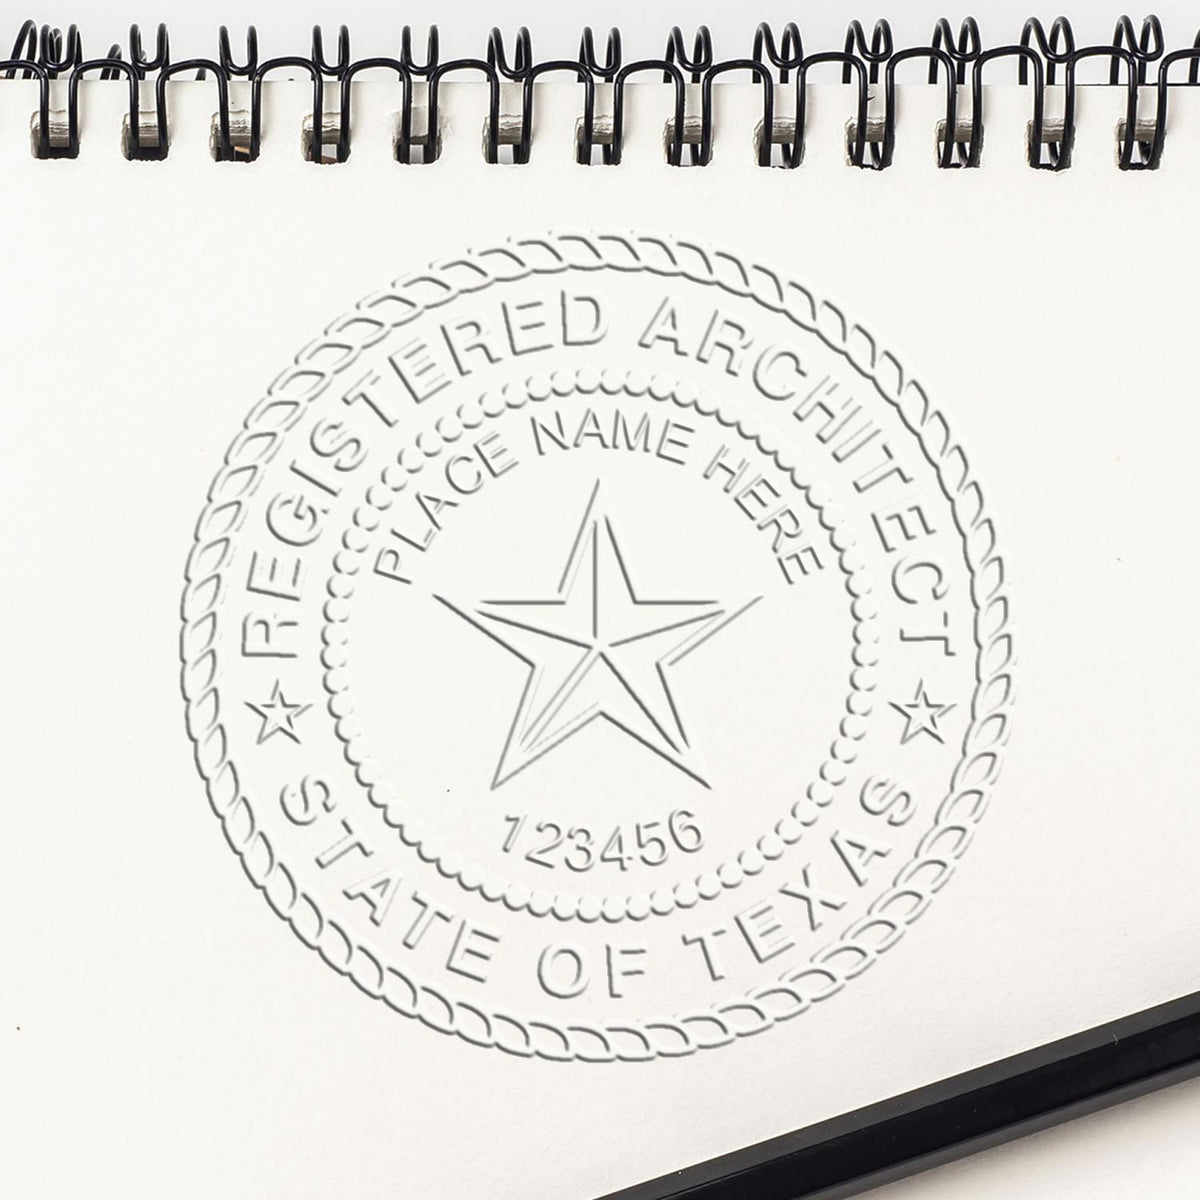 Extended Long Reach Texas Architect Seal Embosser in use photo showing a stamped imprint of the Extended Long Reach Texas Architect Seal Embosser